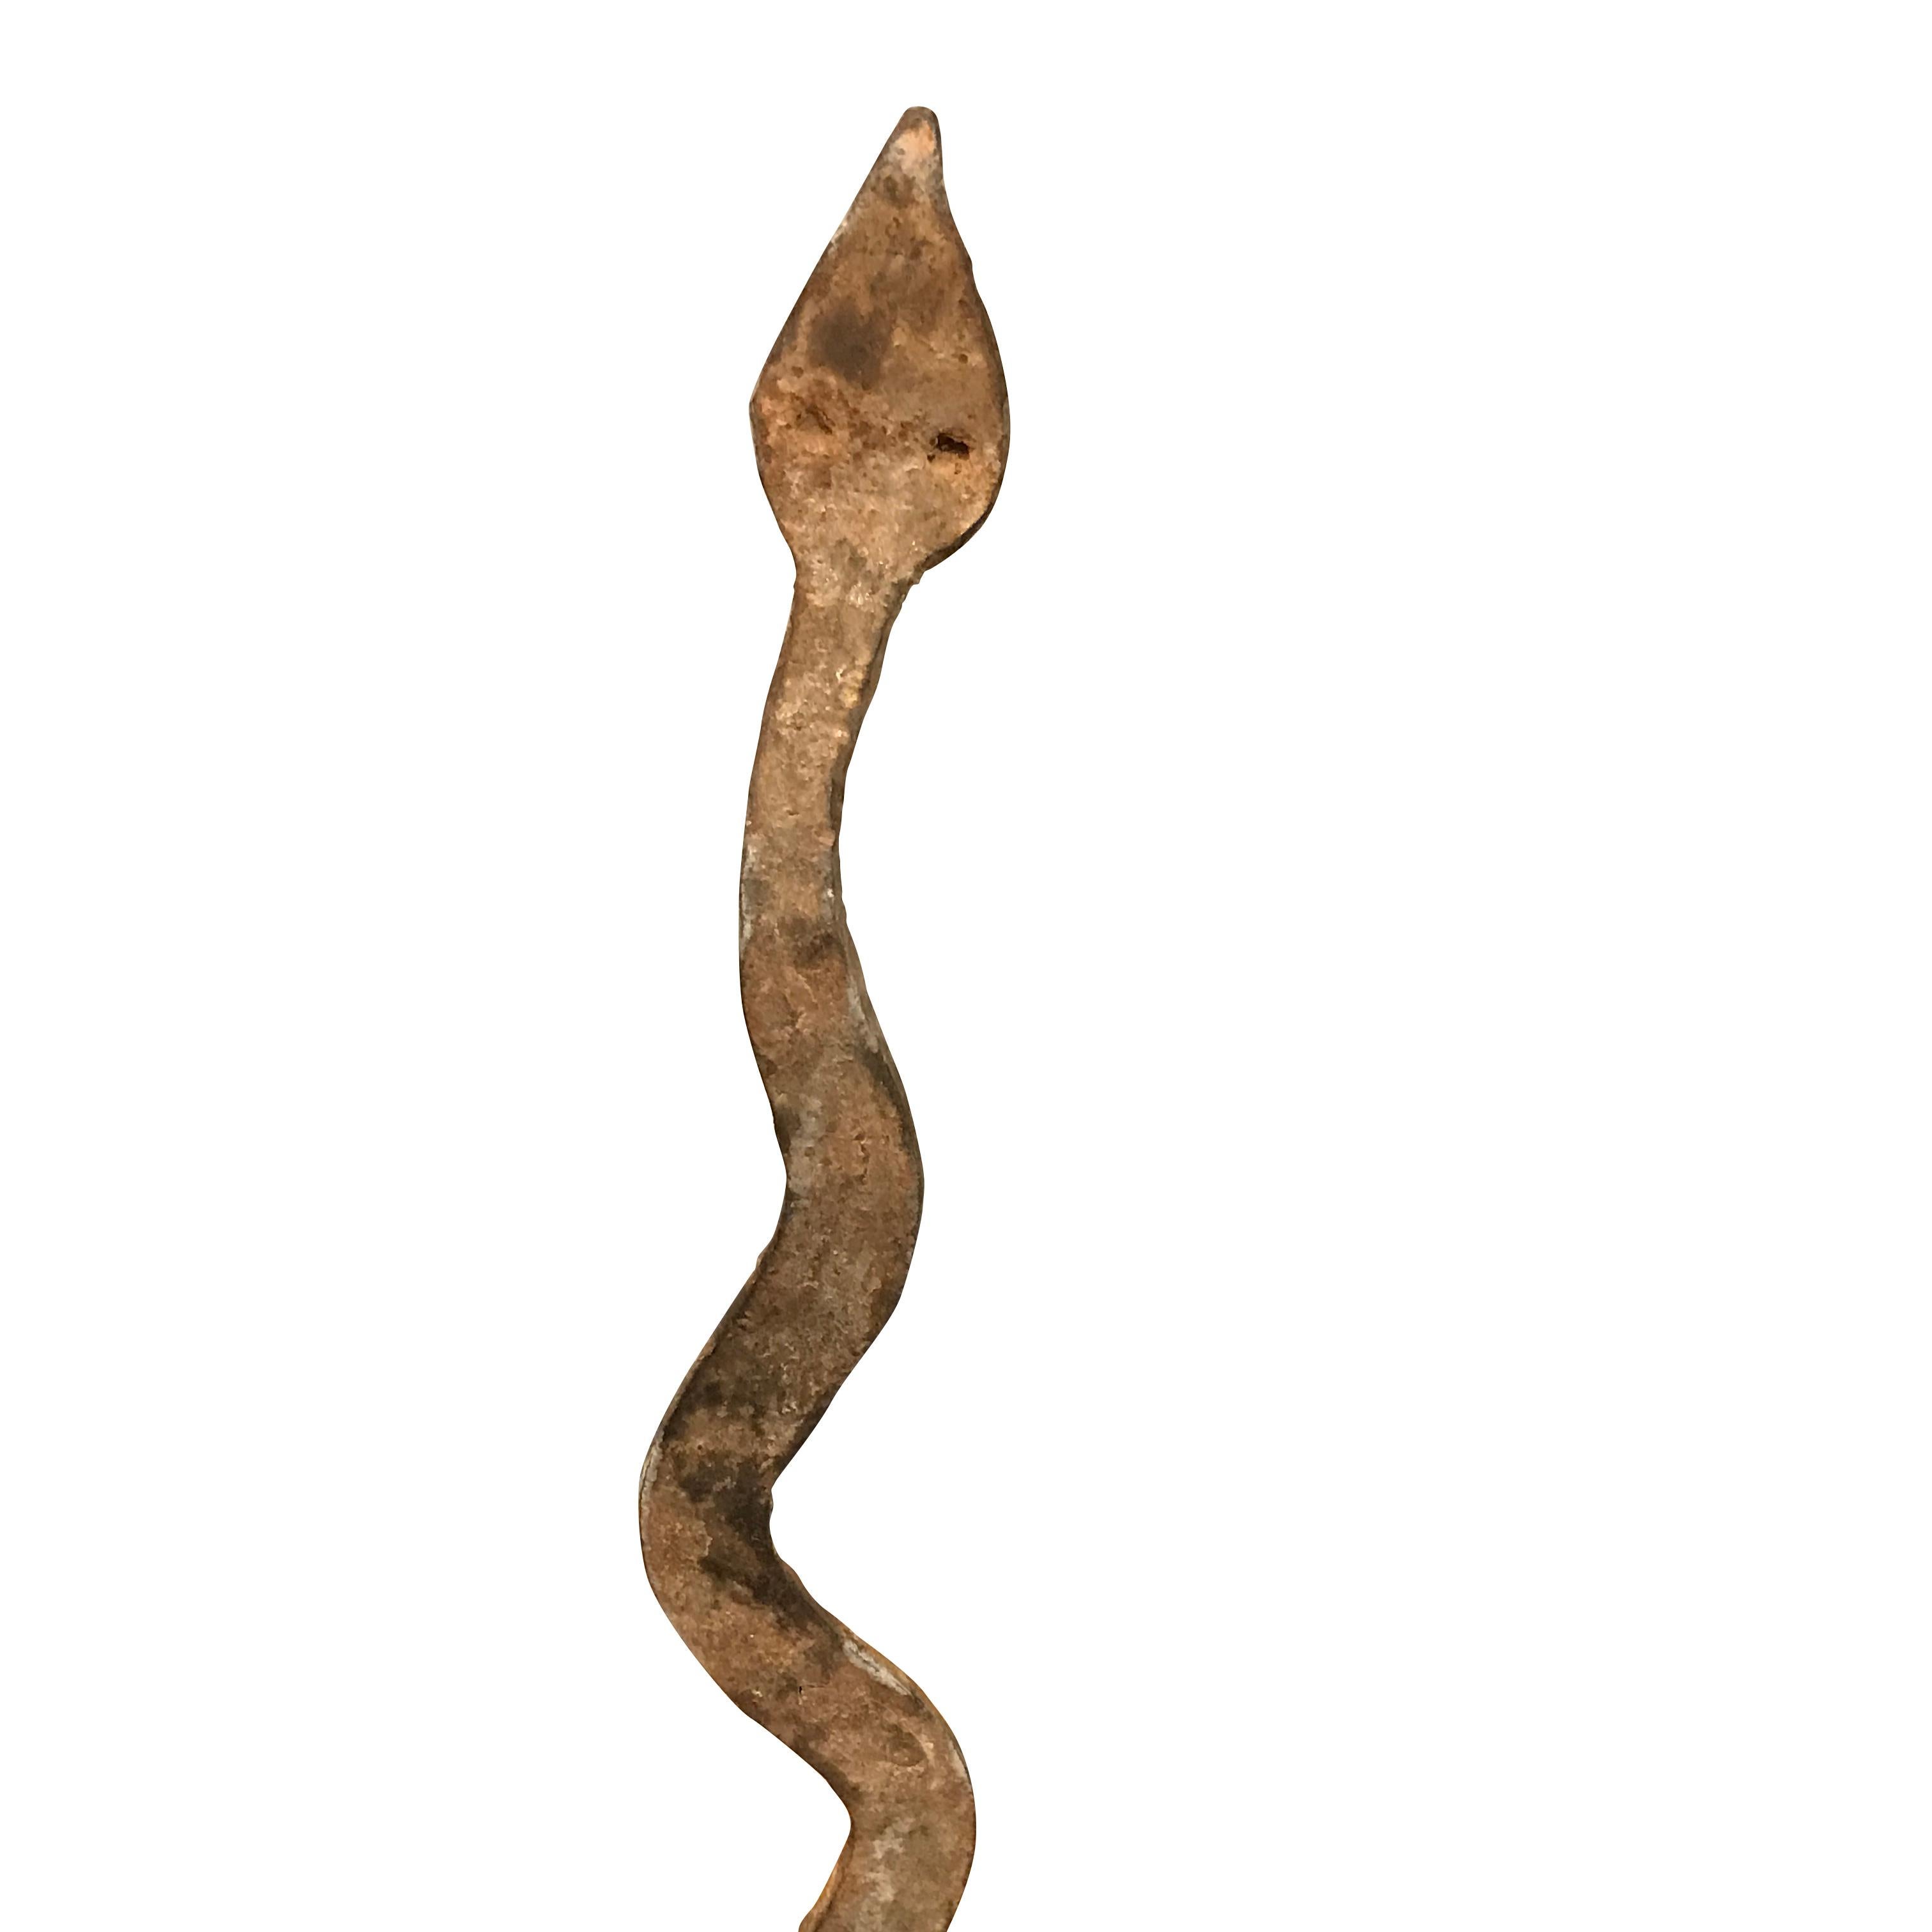 19th century iron snake sculpture on metal stand from the Lobi tribe in Burkina Faso, Africa
Naturally aged patina
Makes a great collection with S4590/91/92
Stand is steel and measures 3